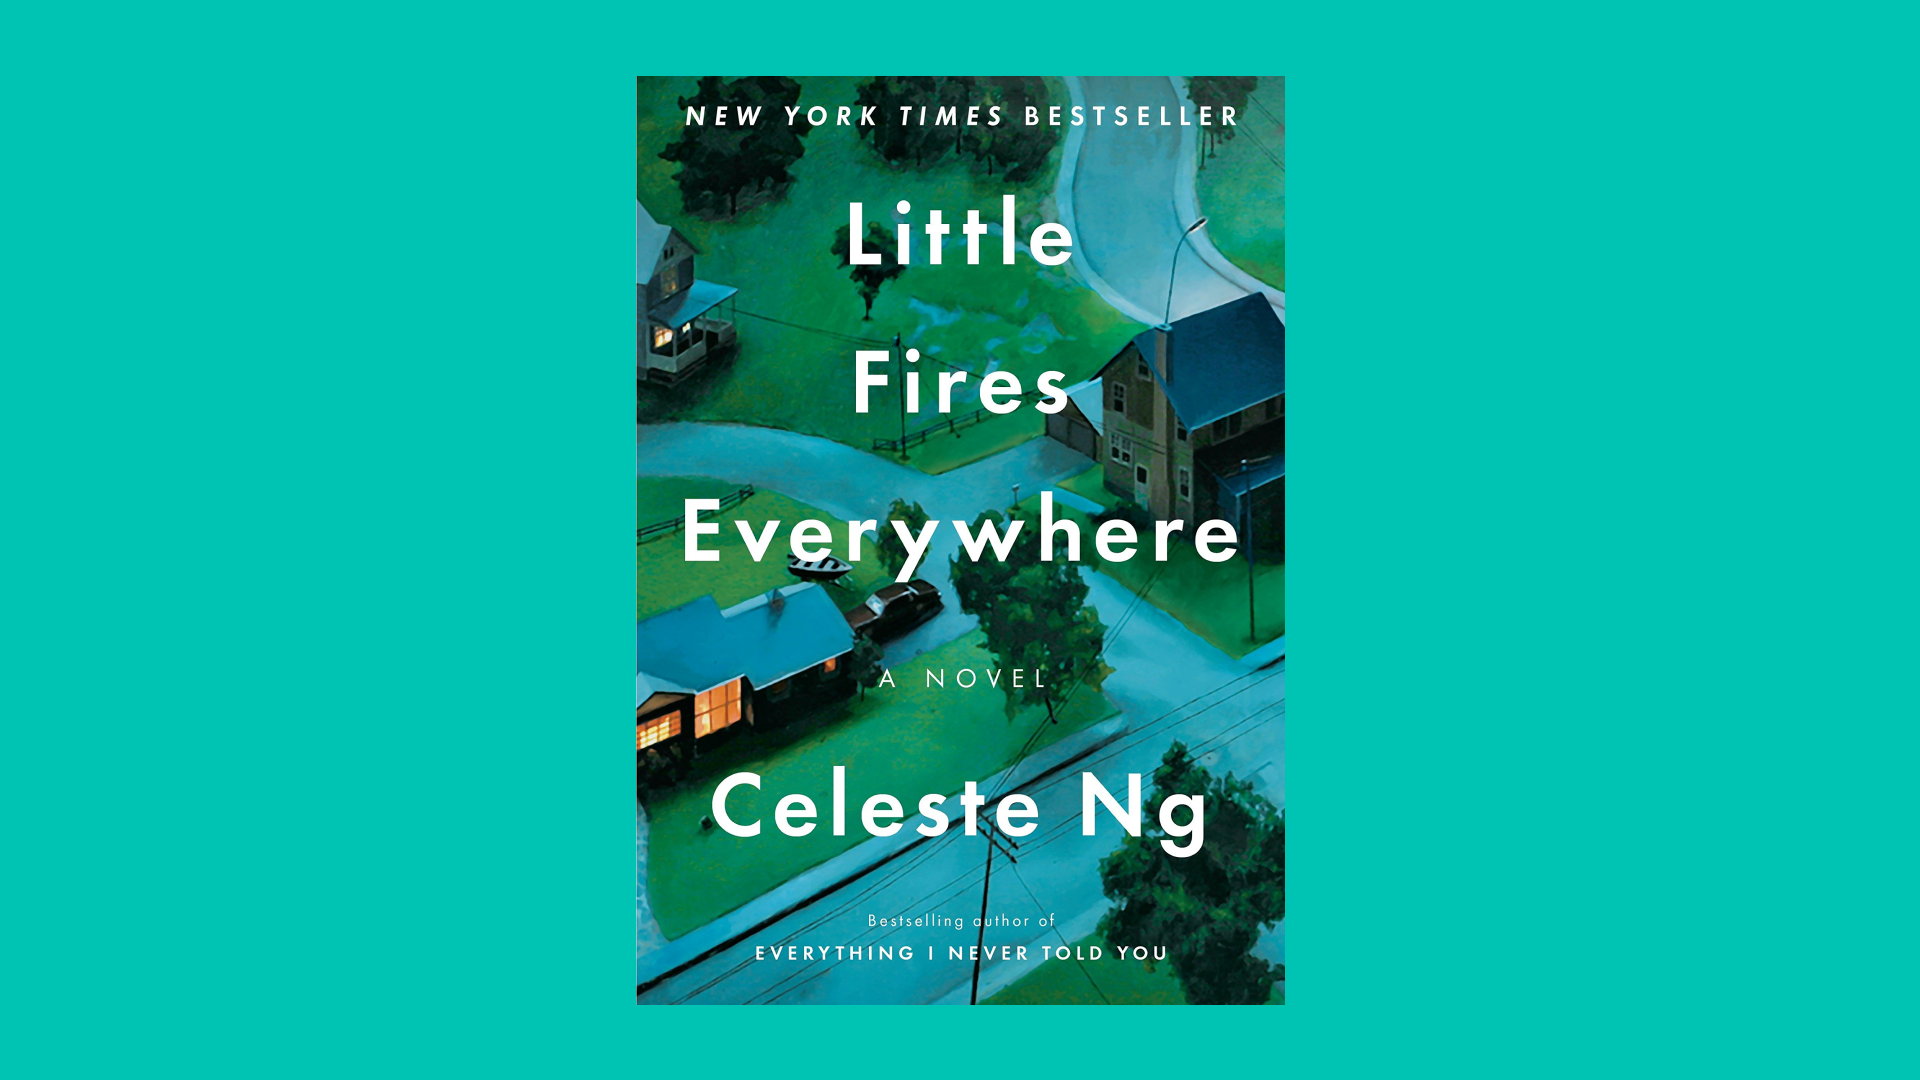 “Little Fires Everywhere” by Celeste Ng